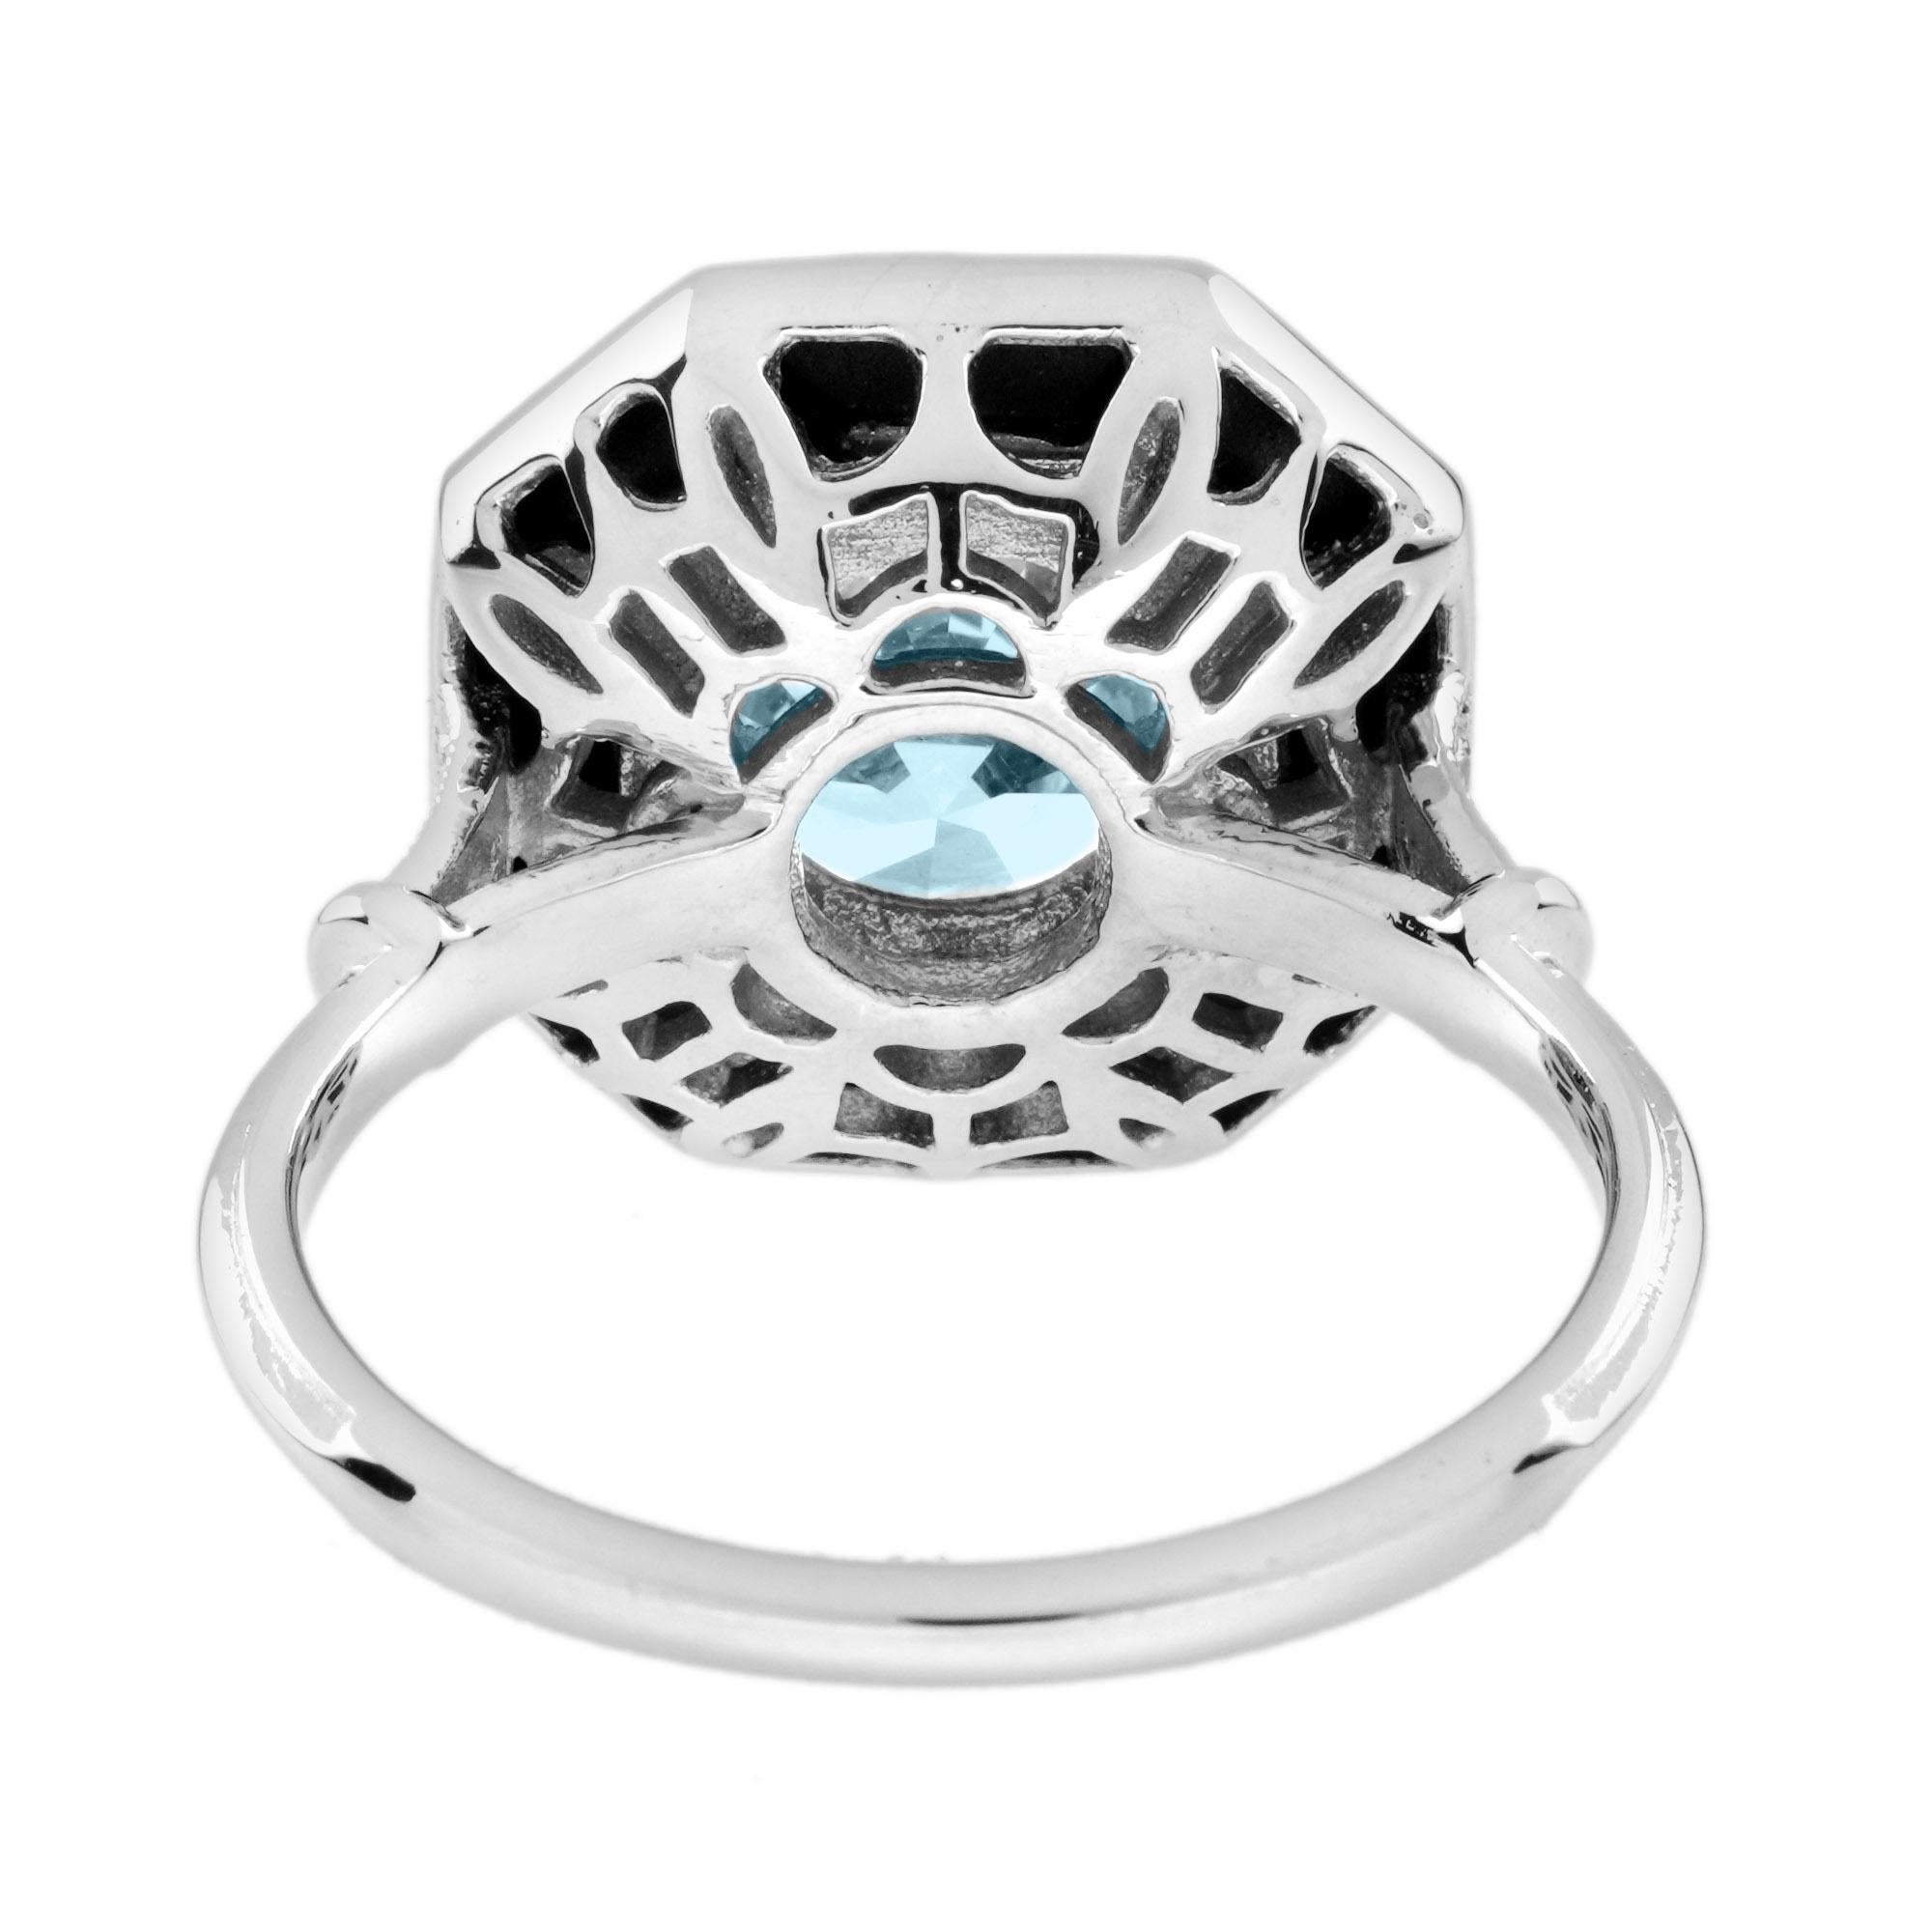 Women's 1.5 Ct. Aquamarine and Onyx Halo Art Deco Style Ring in 18K White Gold  For Sale